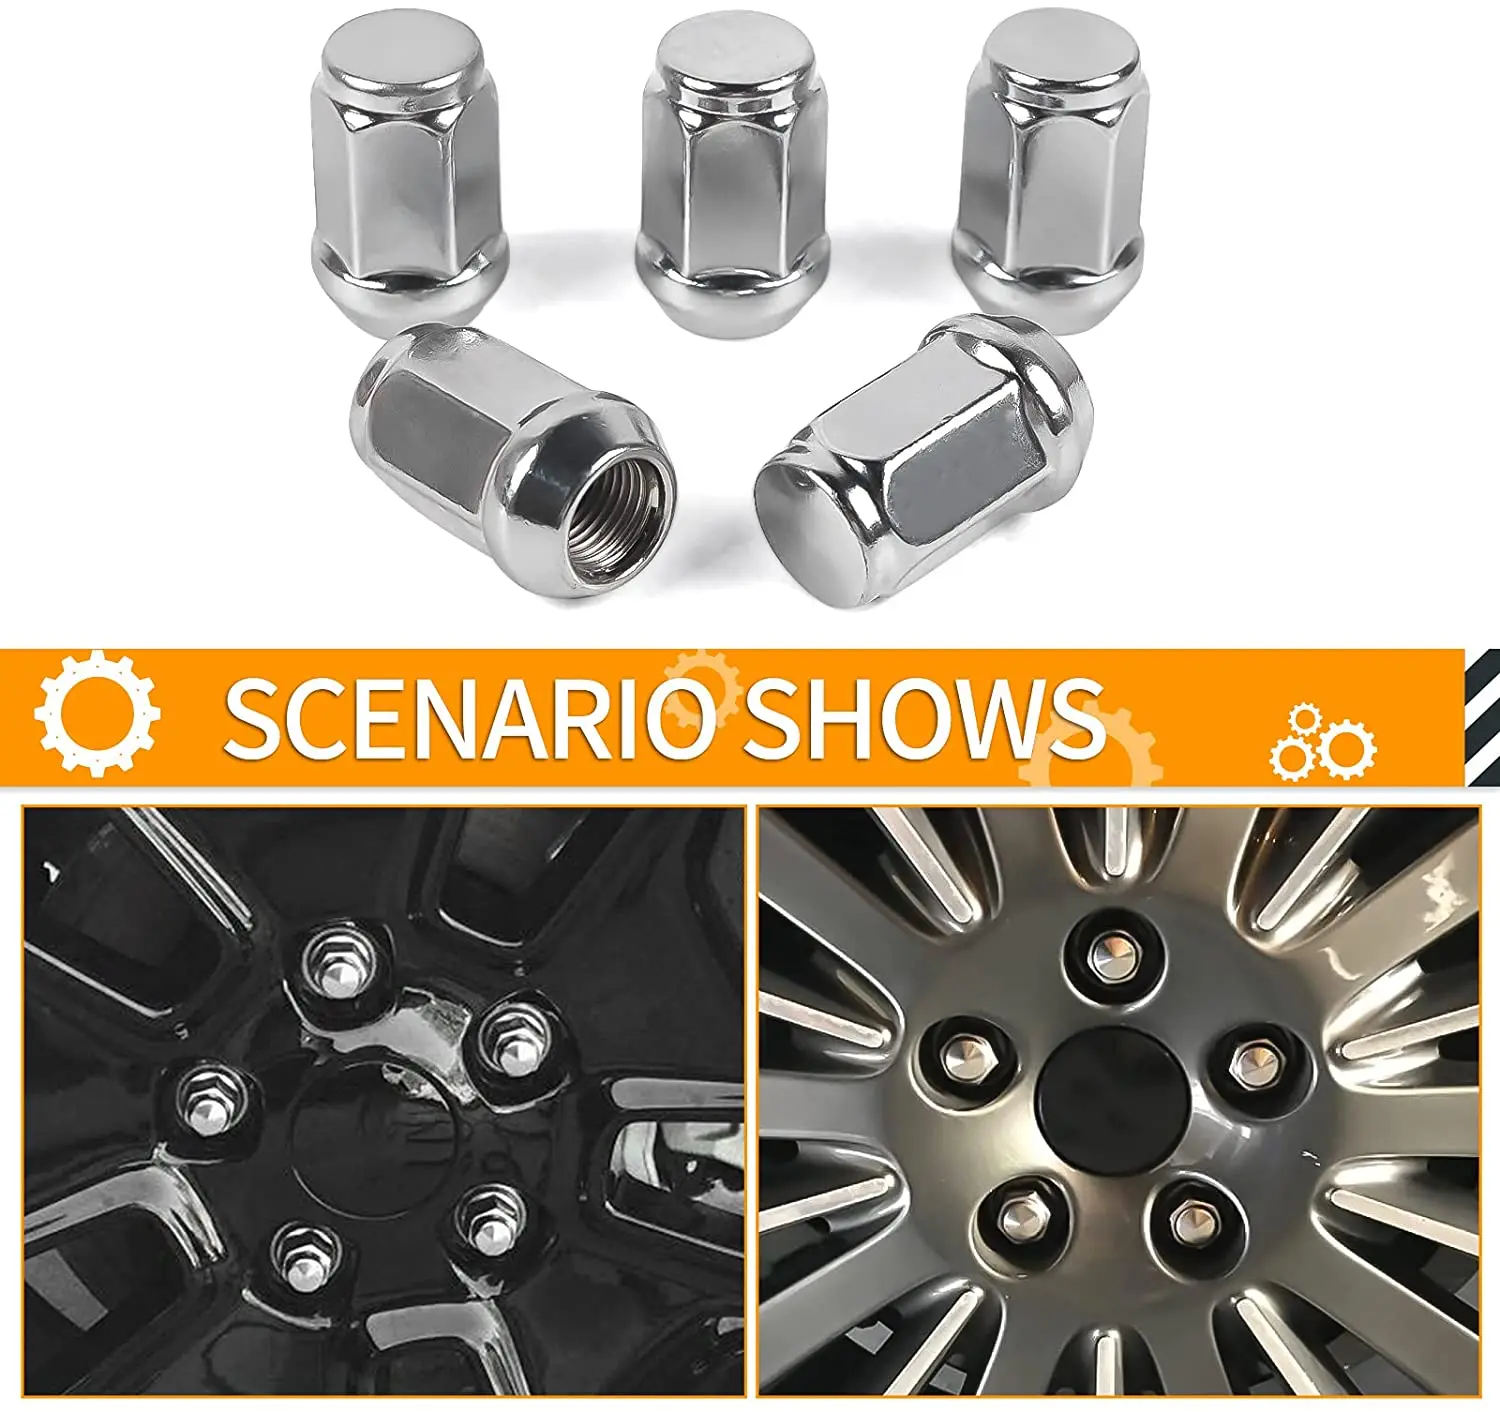 MIKKUPPA 1/2-20 Lug Nuts Replacement for 1993-2010 Jeep Grand Cherokee  Aftermarket Wheel 5pcs Chrome Closed End Solid Lug Nuts AliExpress  Mobile